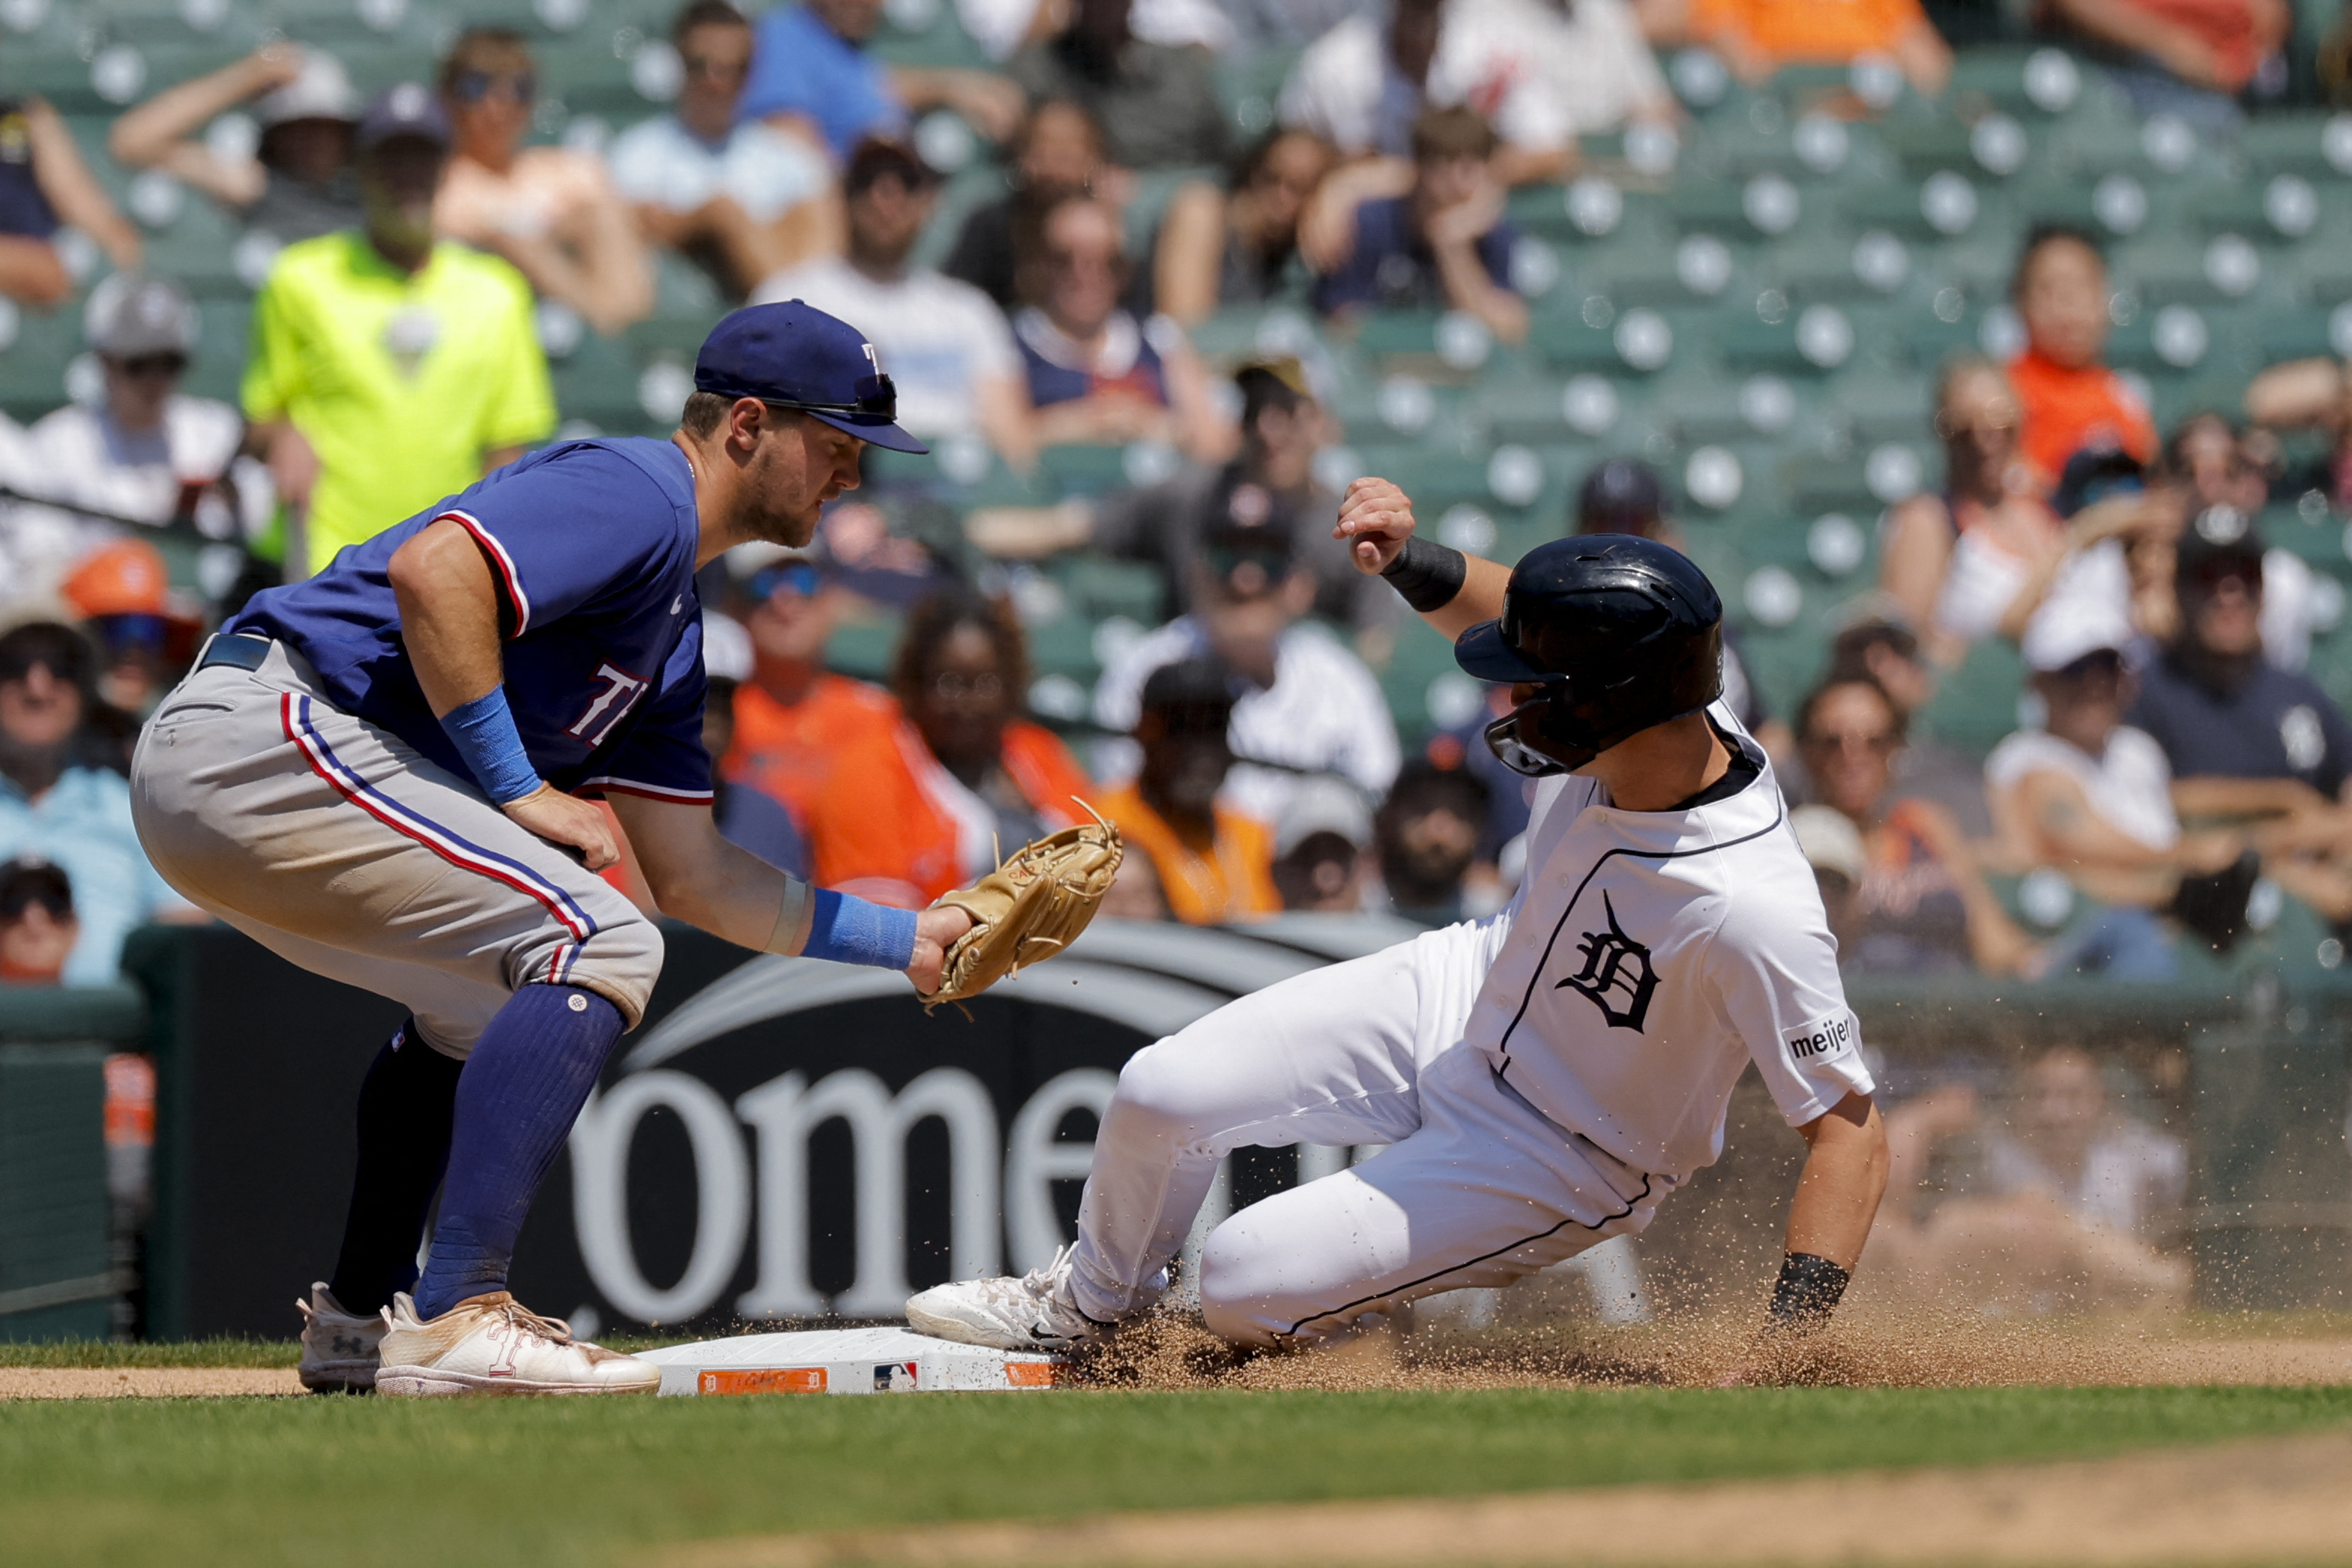 Detroit Tigers: Jake Marisnick has panned out well early on